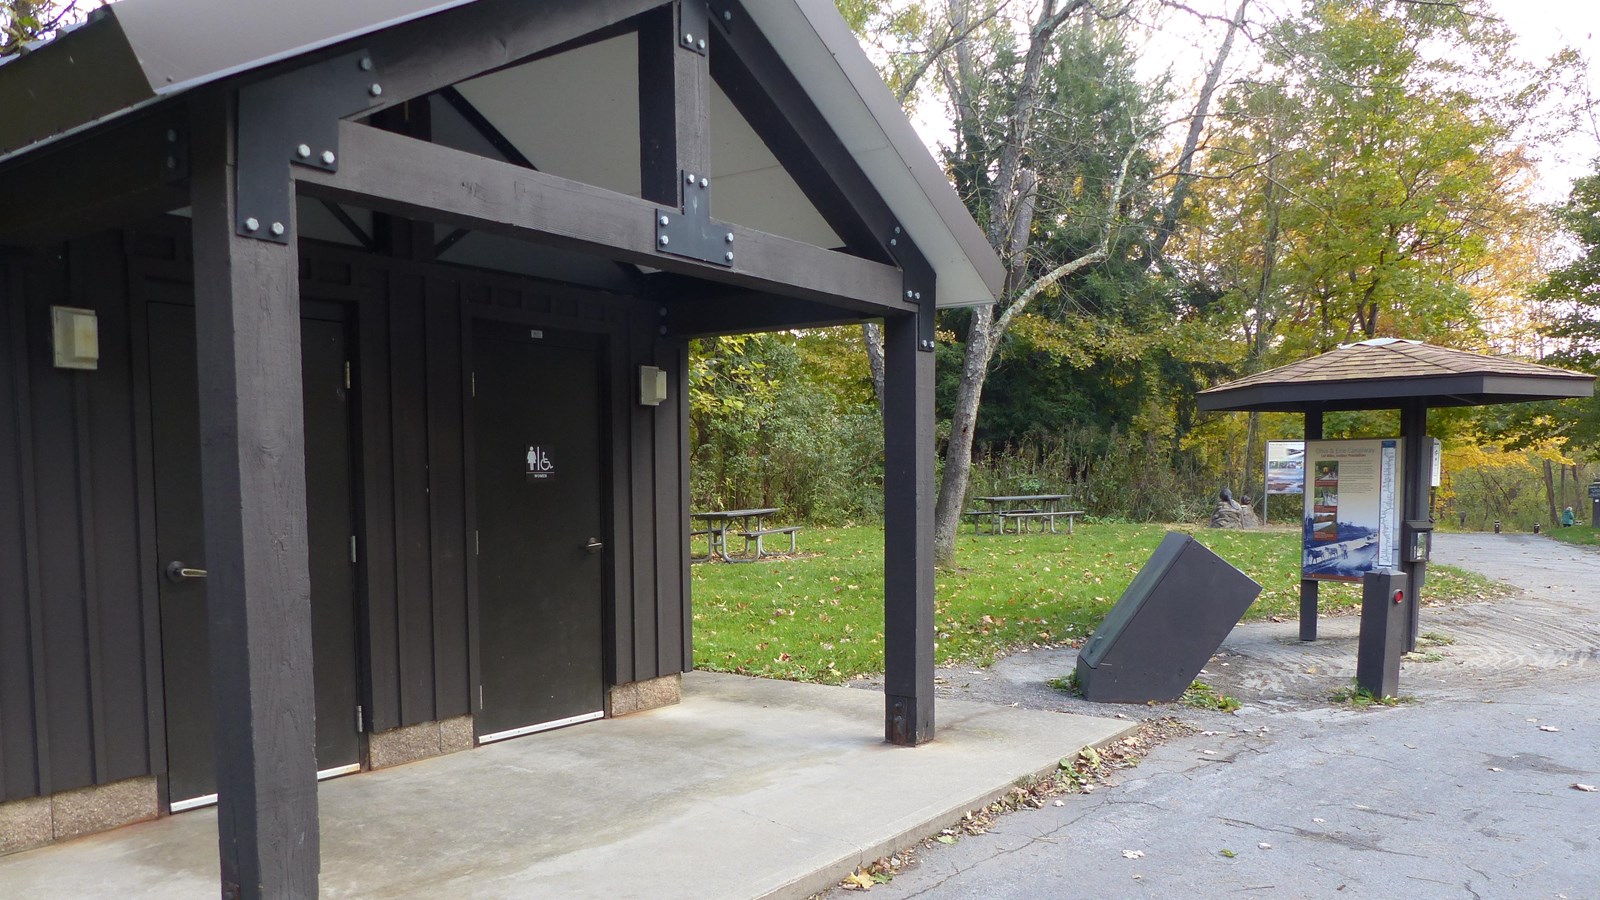 Two door restrooms (left) and a three sided information kiosk along the driveway with a trail (right